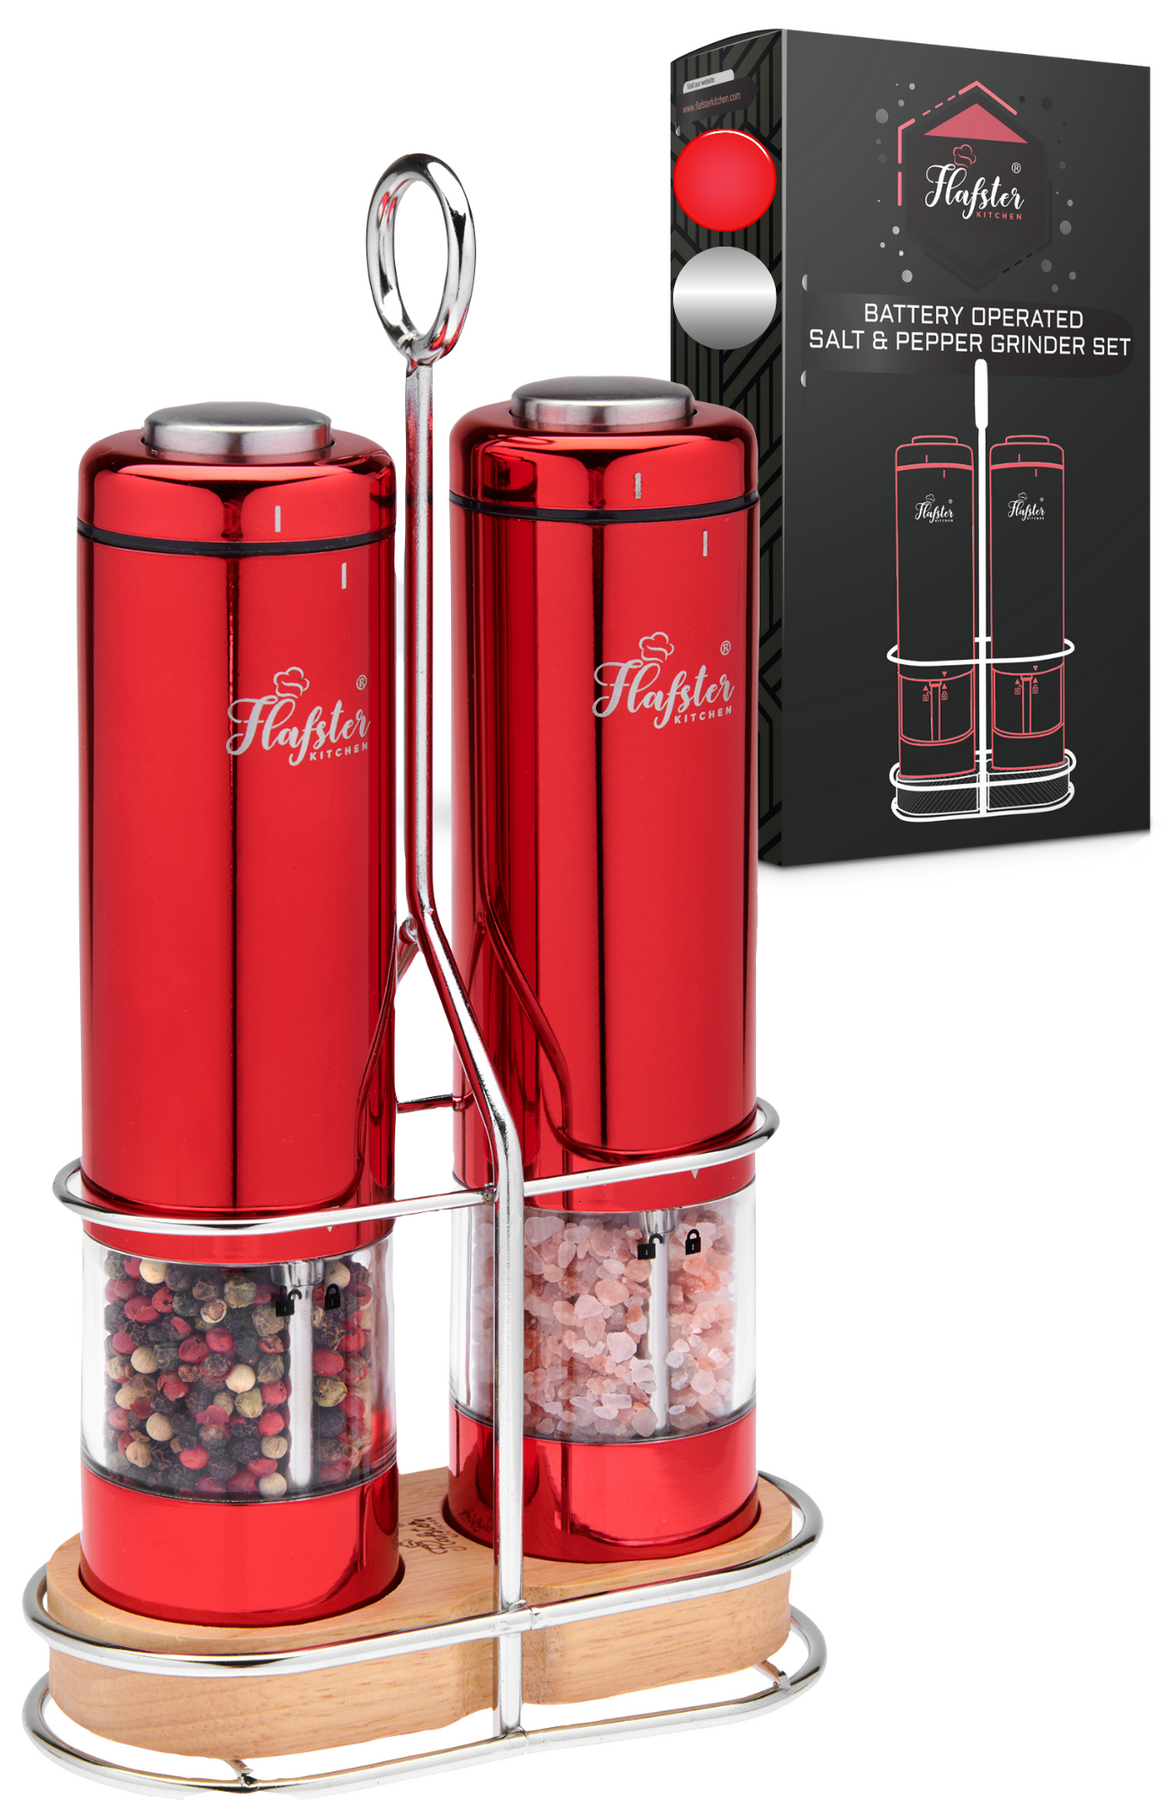 Flafster Kitchen Electric Pepper Grinder - Battery Powered Stainless Steel  Salt or Pepper Mill - Silver